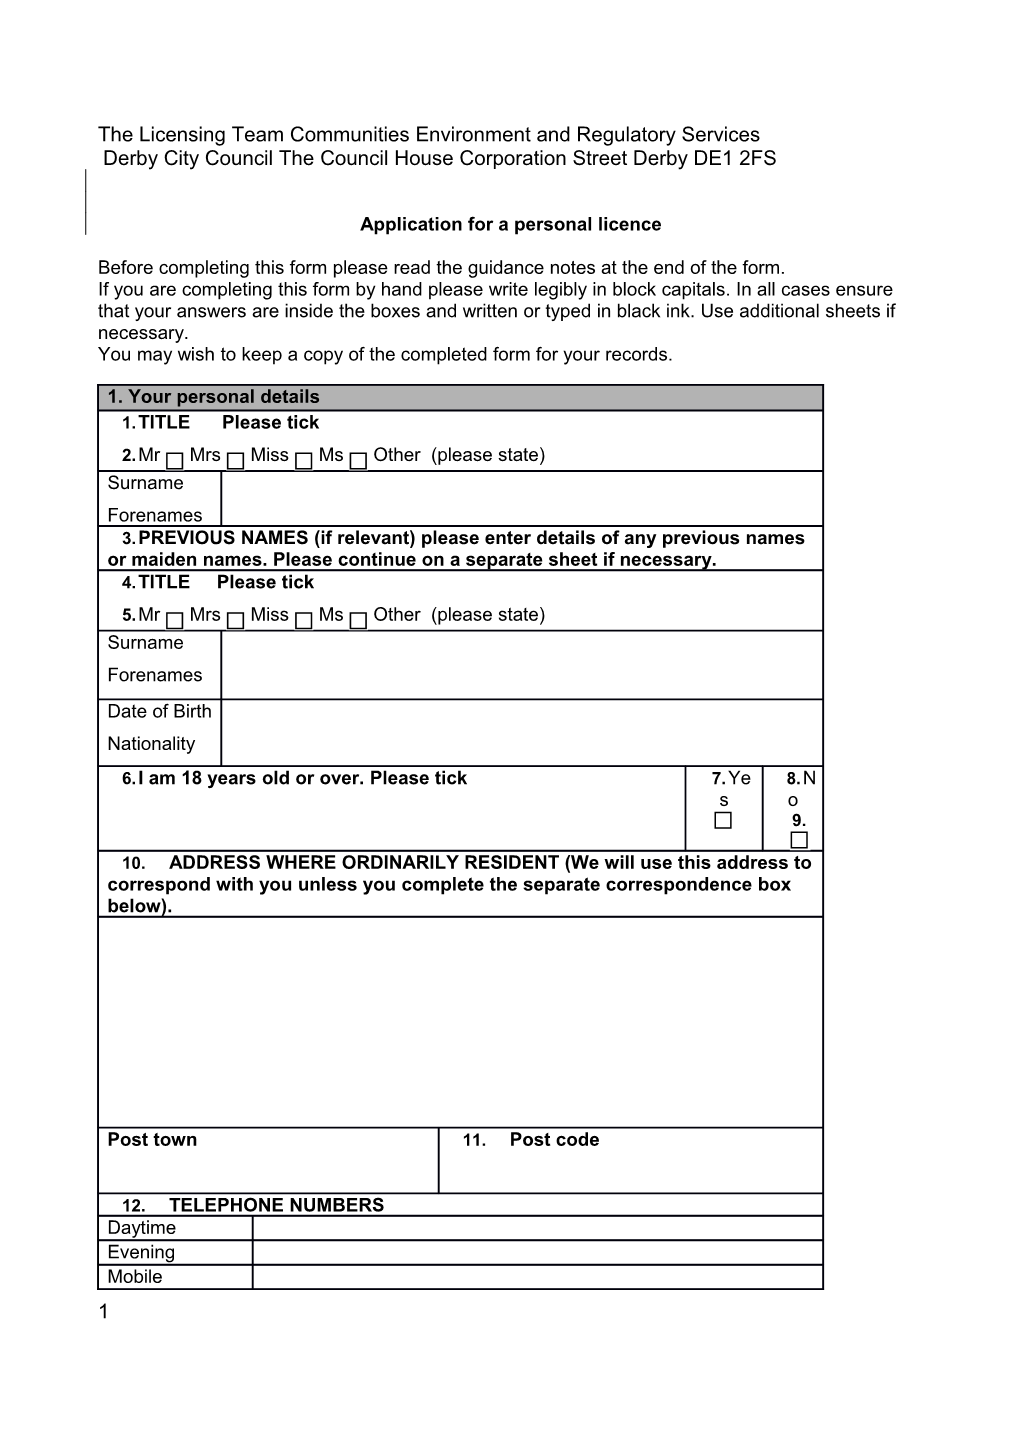 Application for a Personal Licence s2